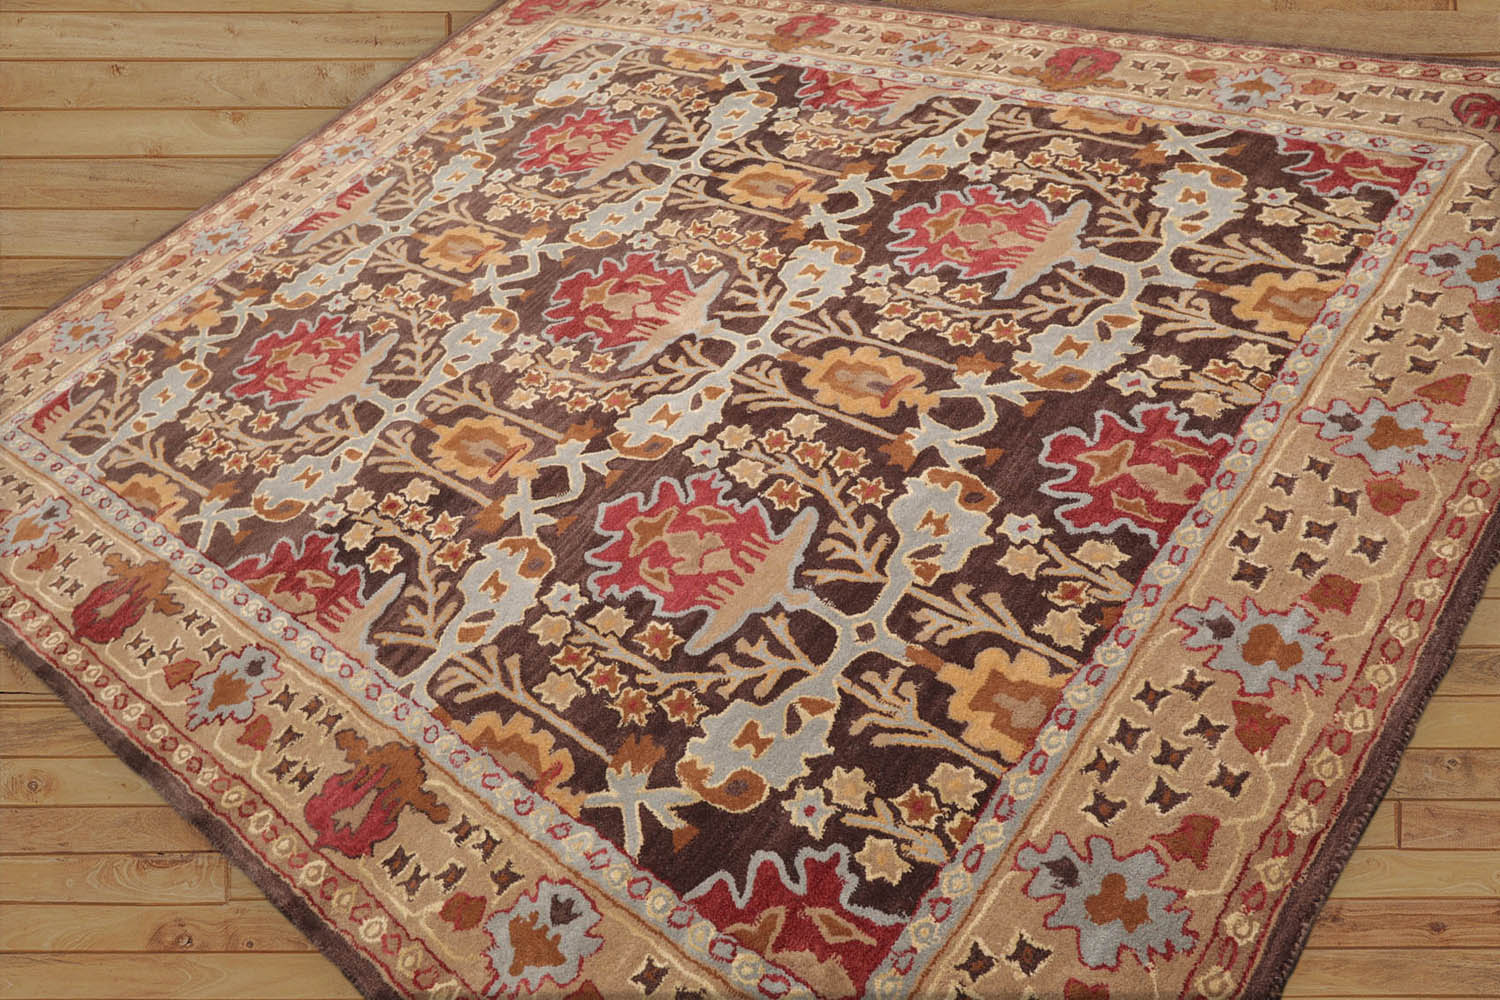 Pancu 8x10 Hand Tufted Hand Made 100% Wool William Morris Traditional Oriental Area Rug Brown, Beige Color